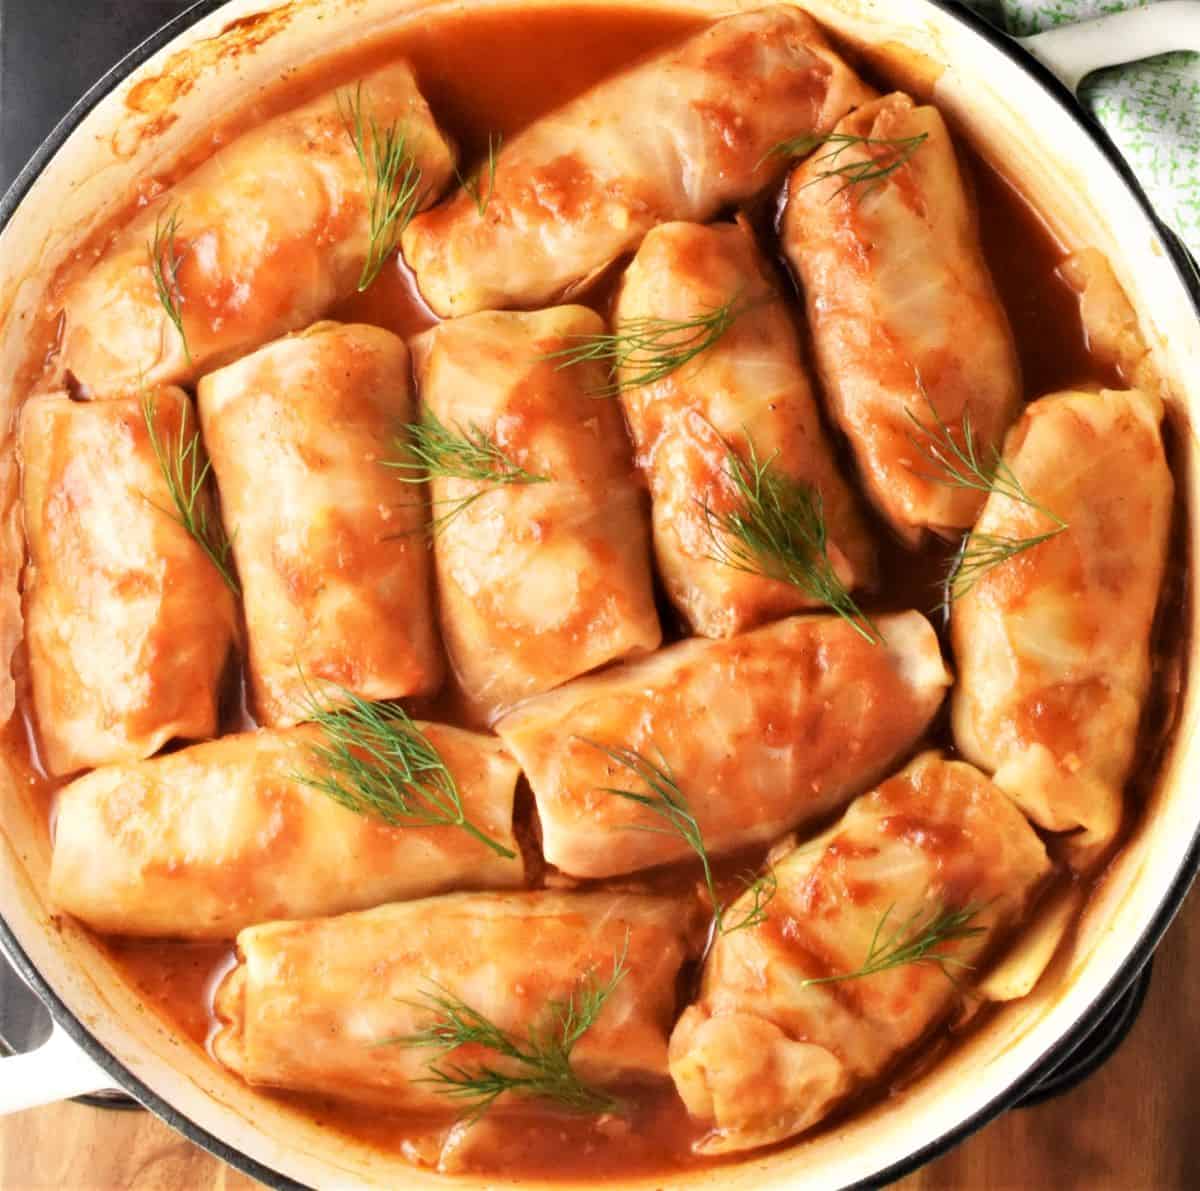 Cabbage rolls with tomato sauce in large casserole dish garnished with dill.